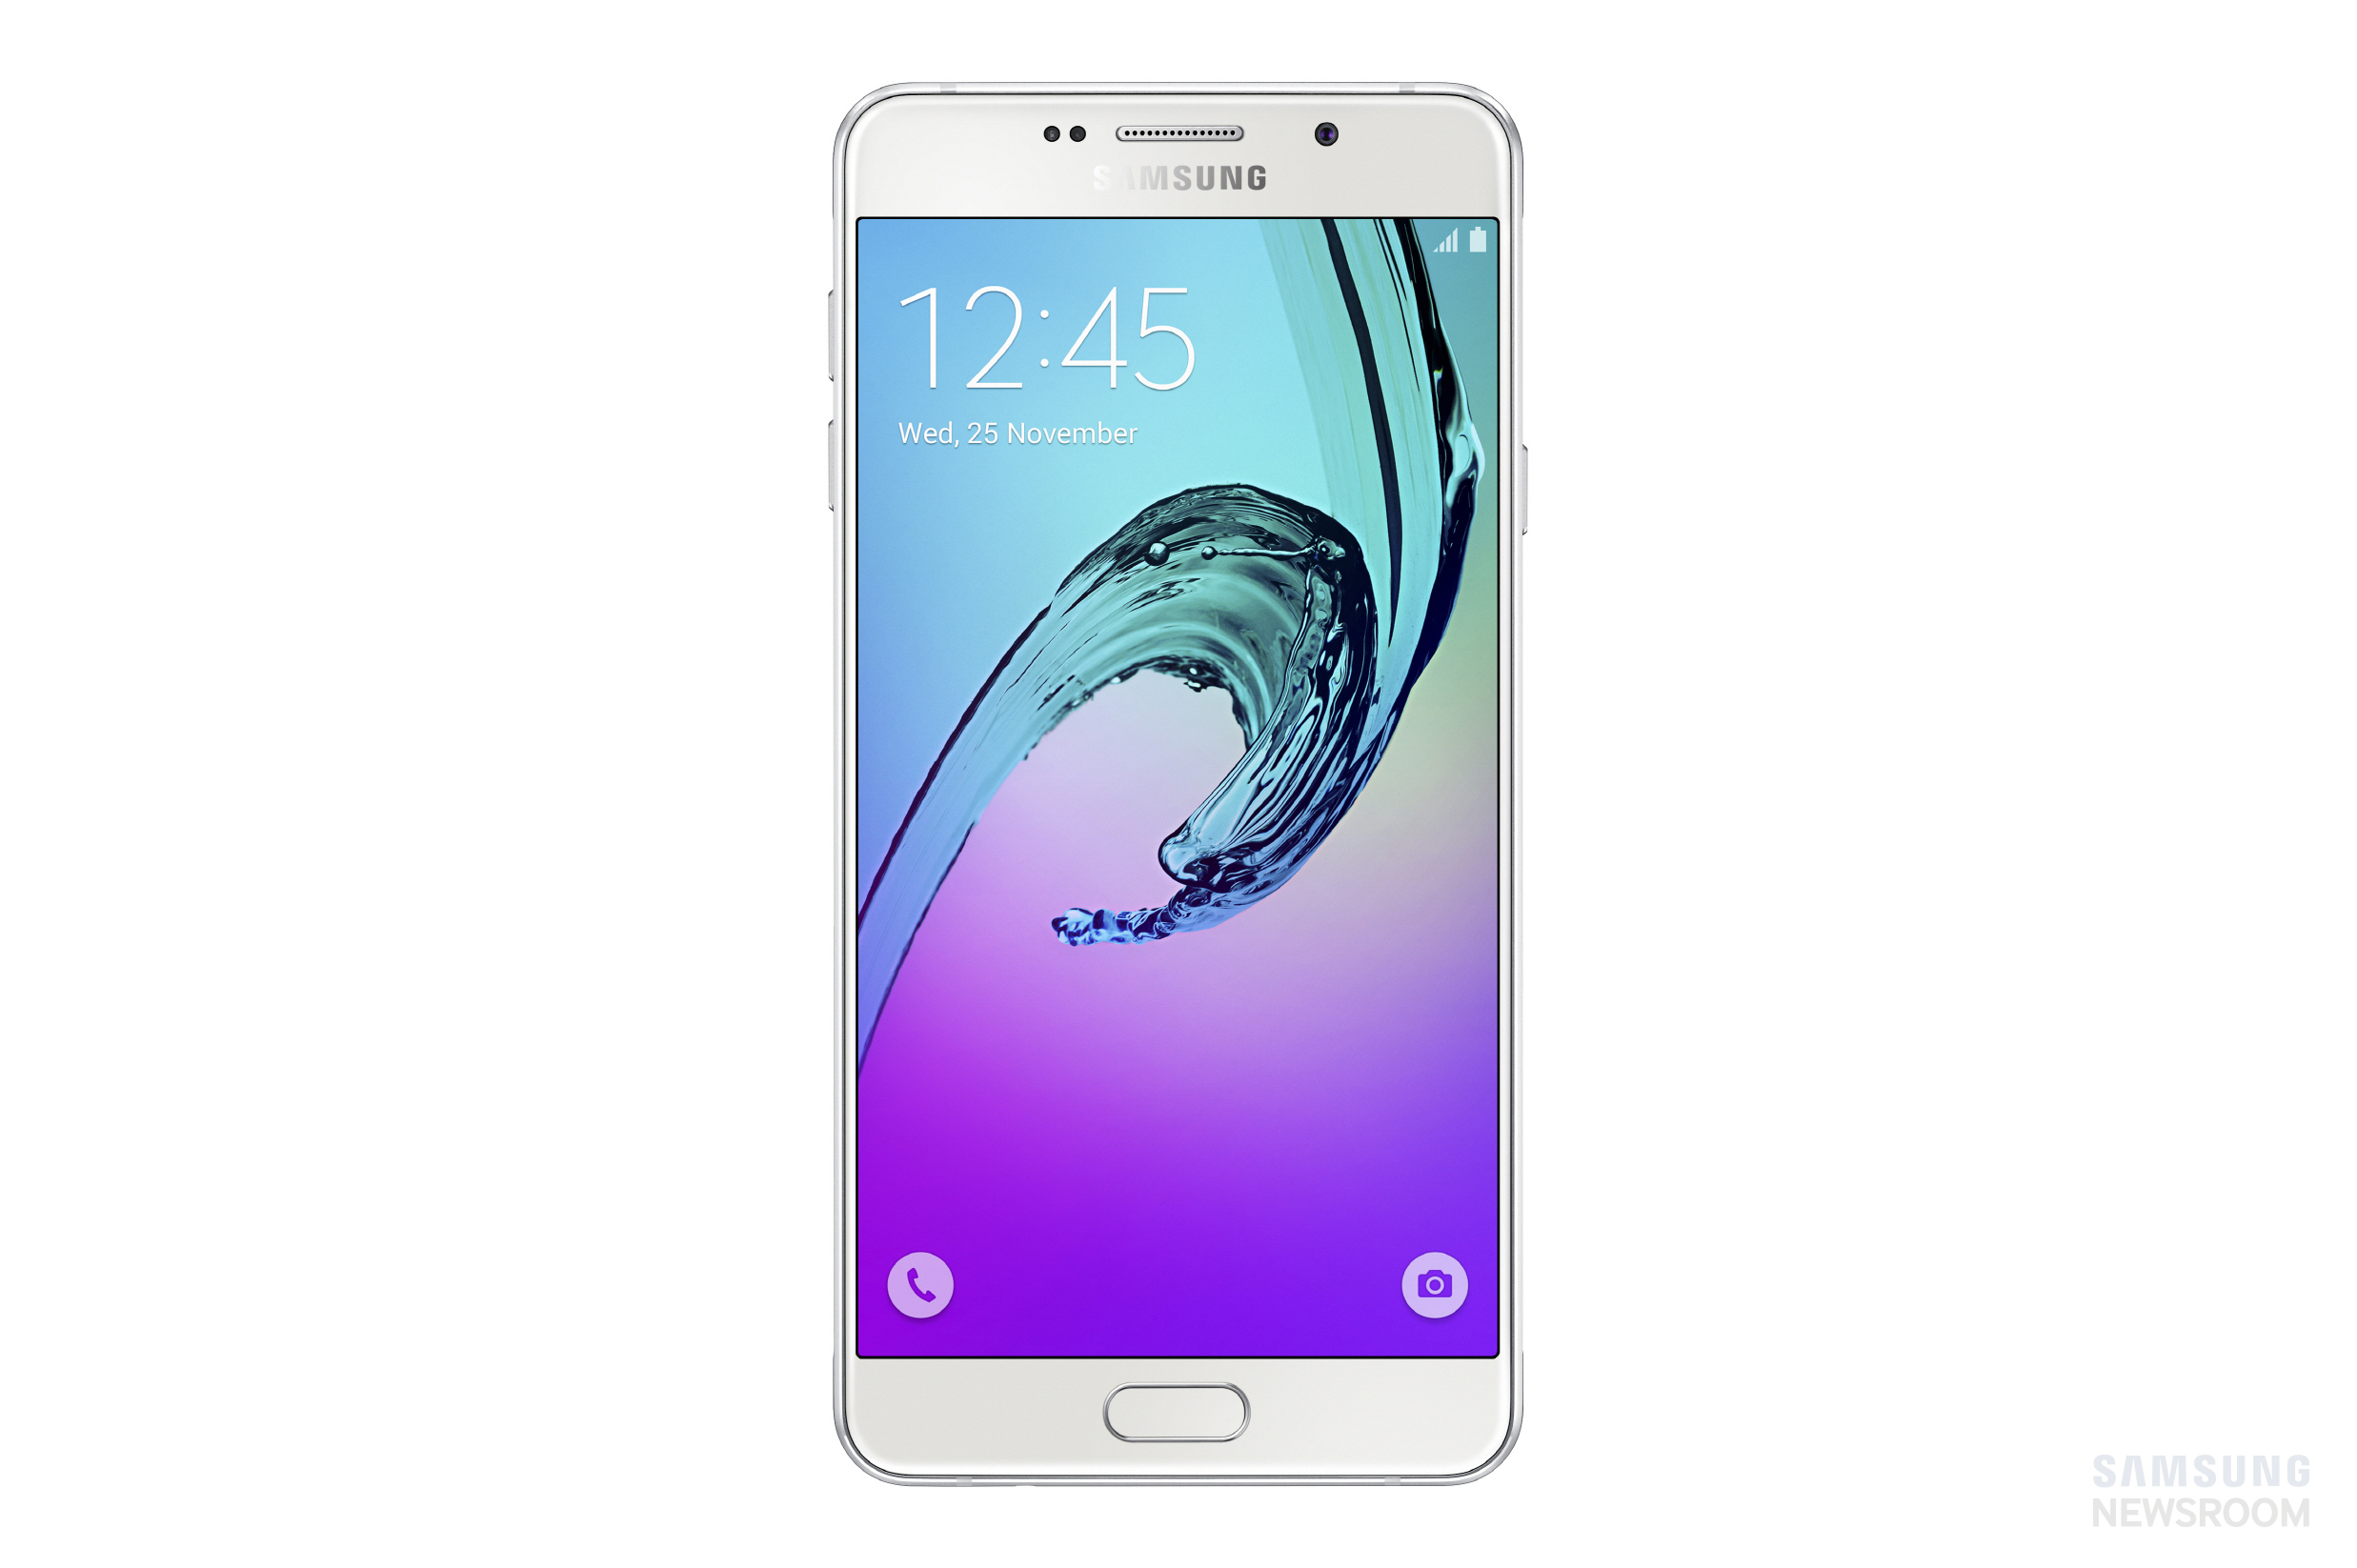 Gevangenisstraf Op maat stad Samsung Launches Galaxy A (2016) with Premium Design and Improved Features  – Samsung Global Newsroom